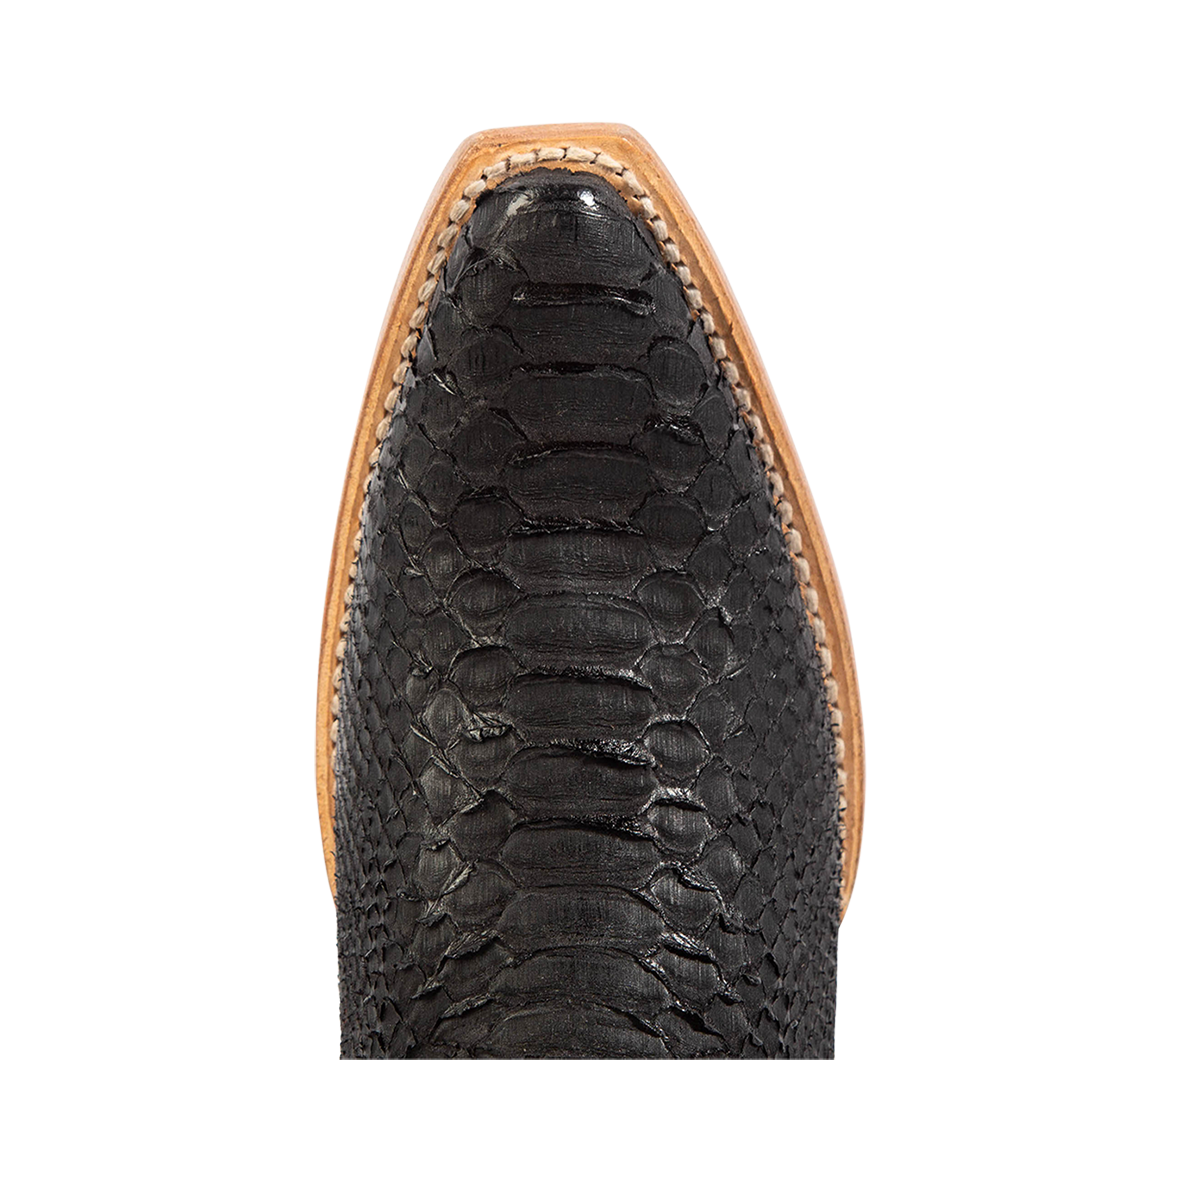 Top view showing snip toe construction with stitch detailing on FREEBIRD women's Woodland black python multi leather boot